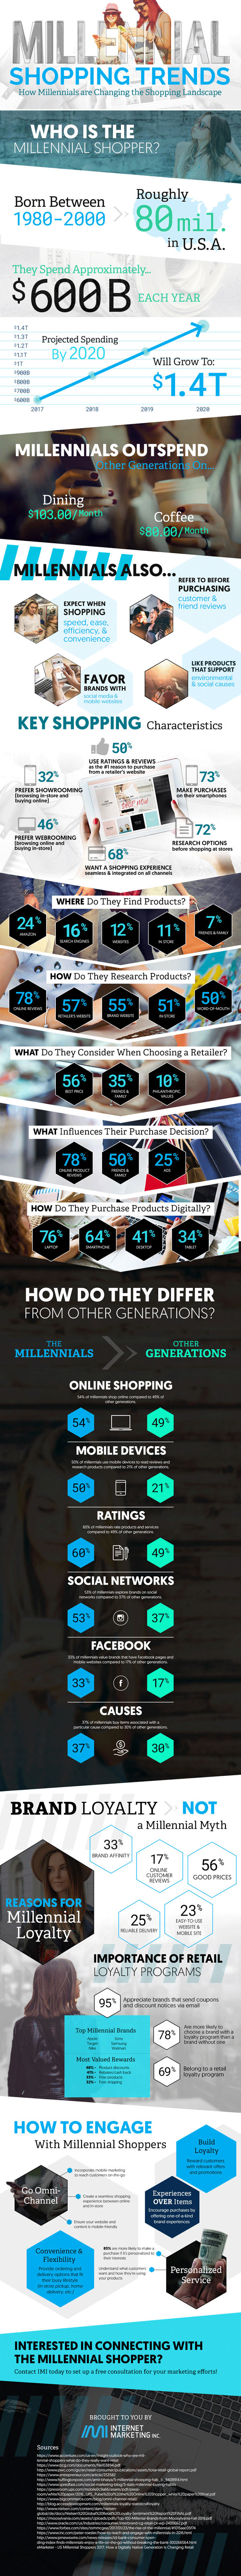 Millennial Shopping Trends Infographic